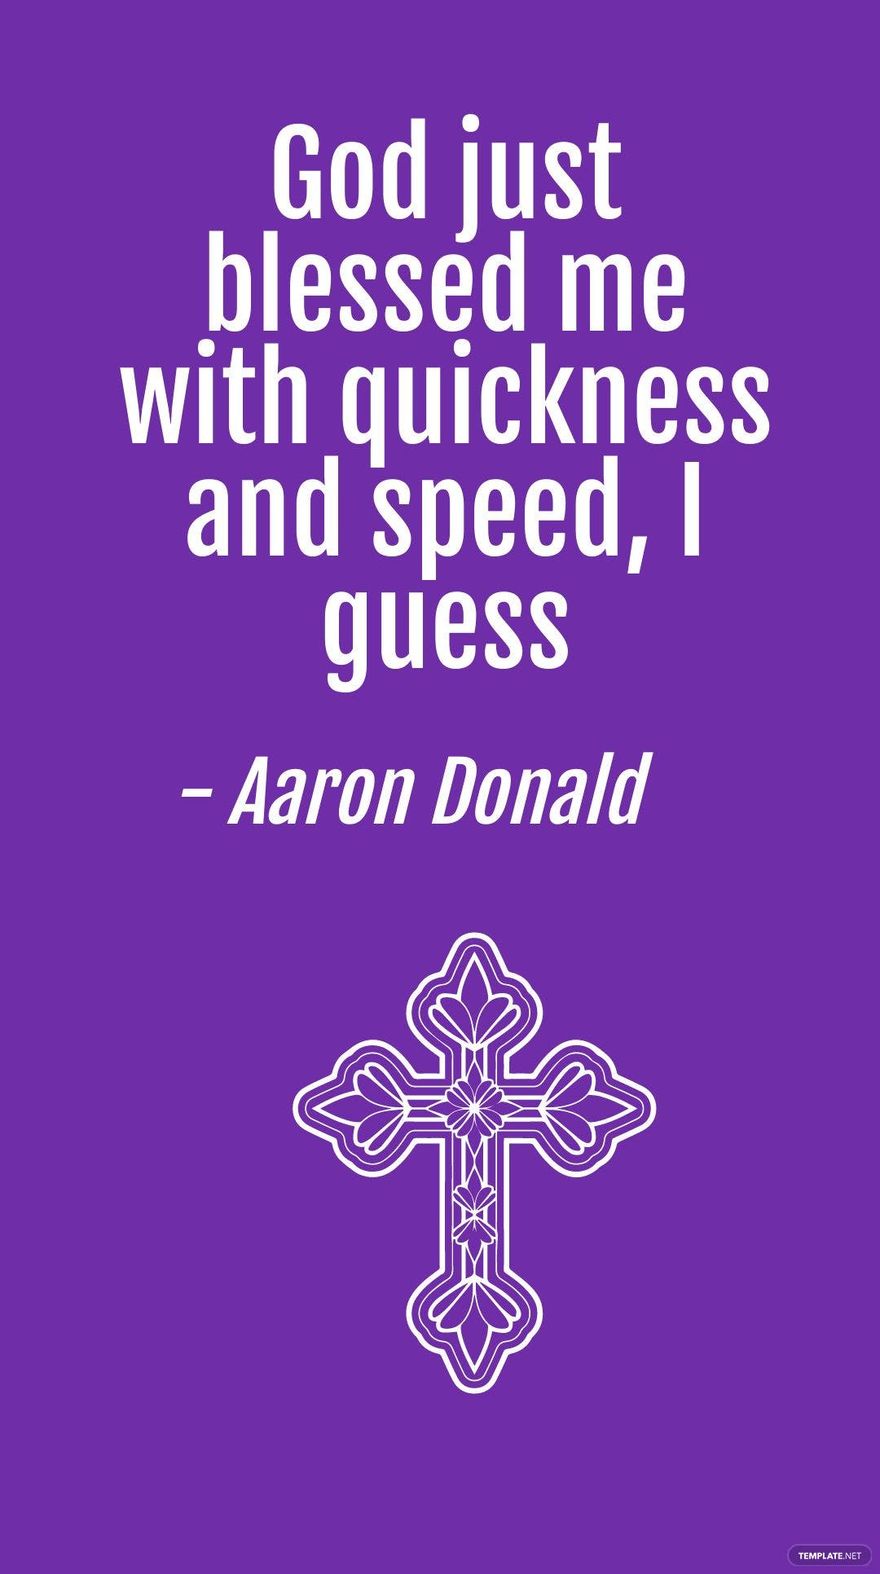 Aaron Donald - God just blessed me with quickness and speed, I guess in JPG